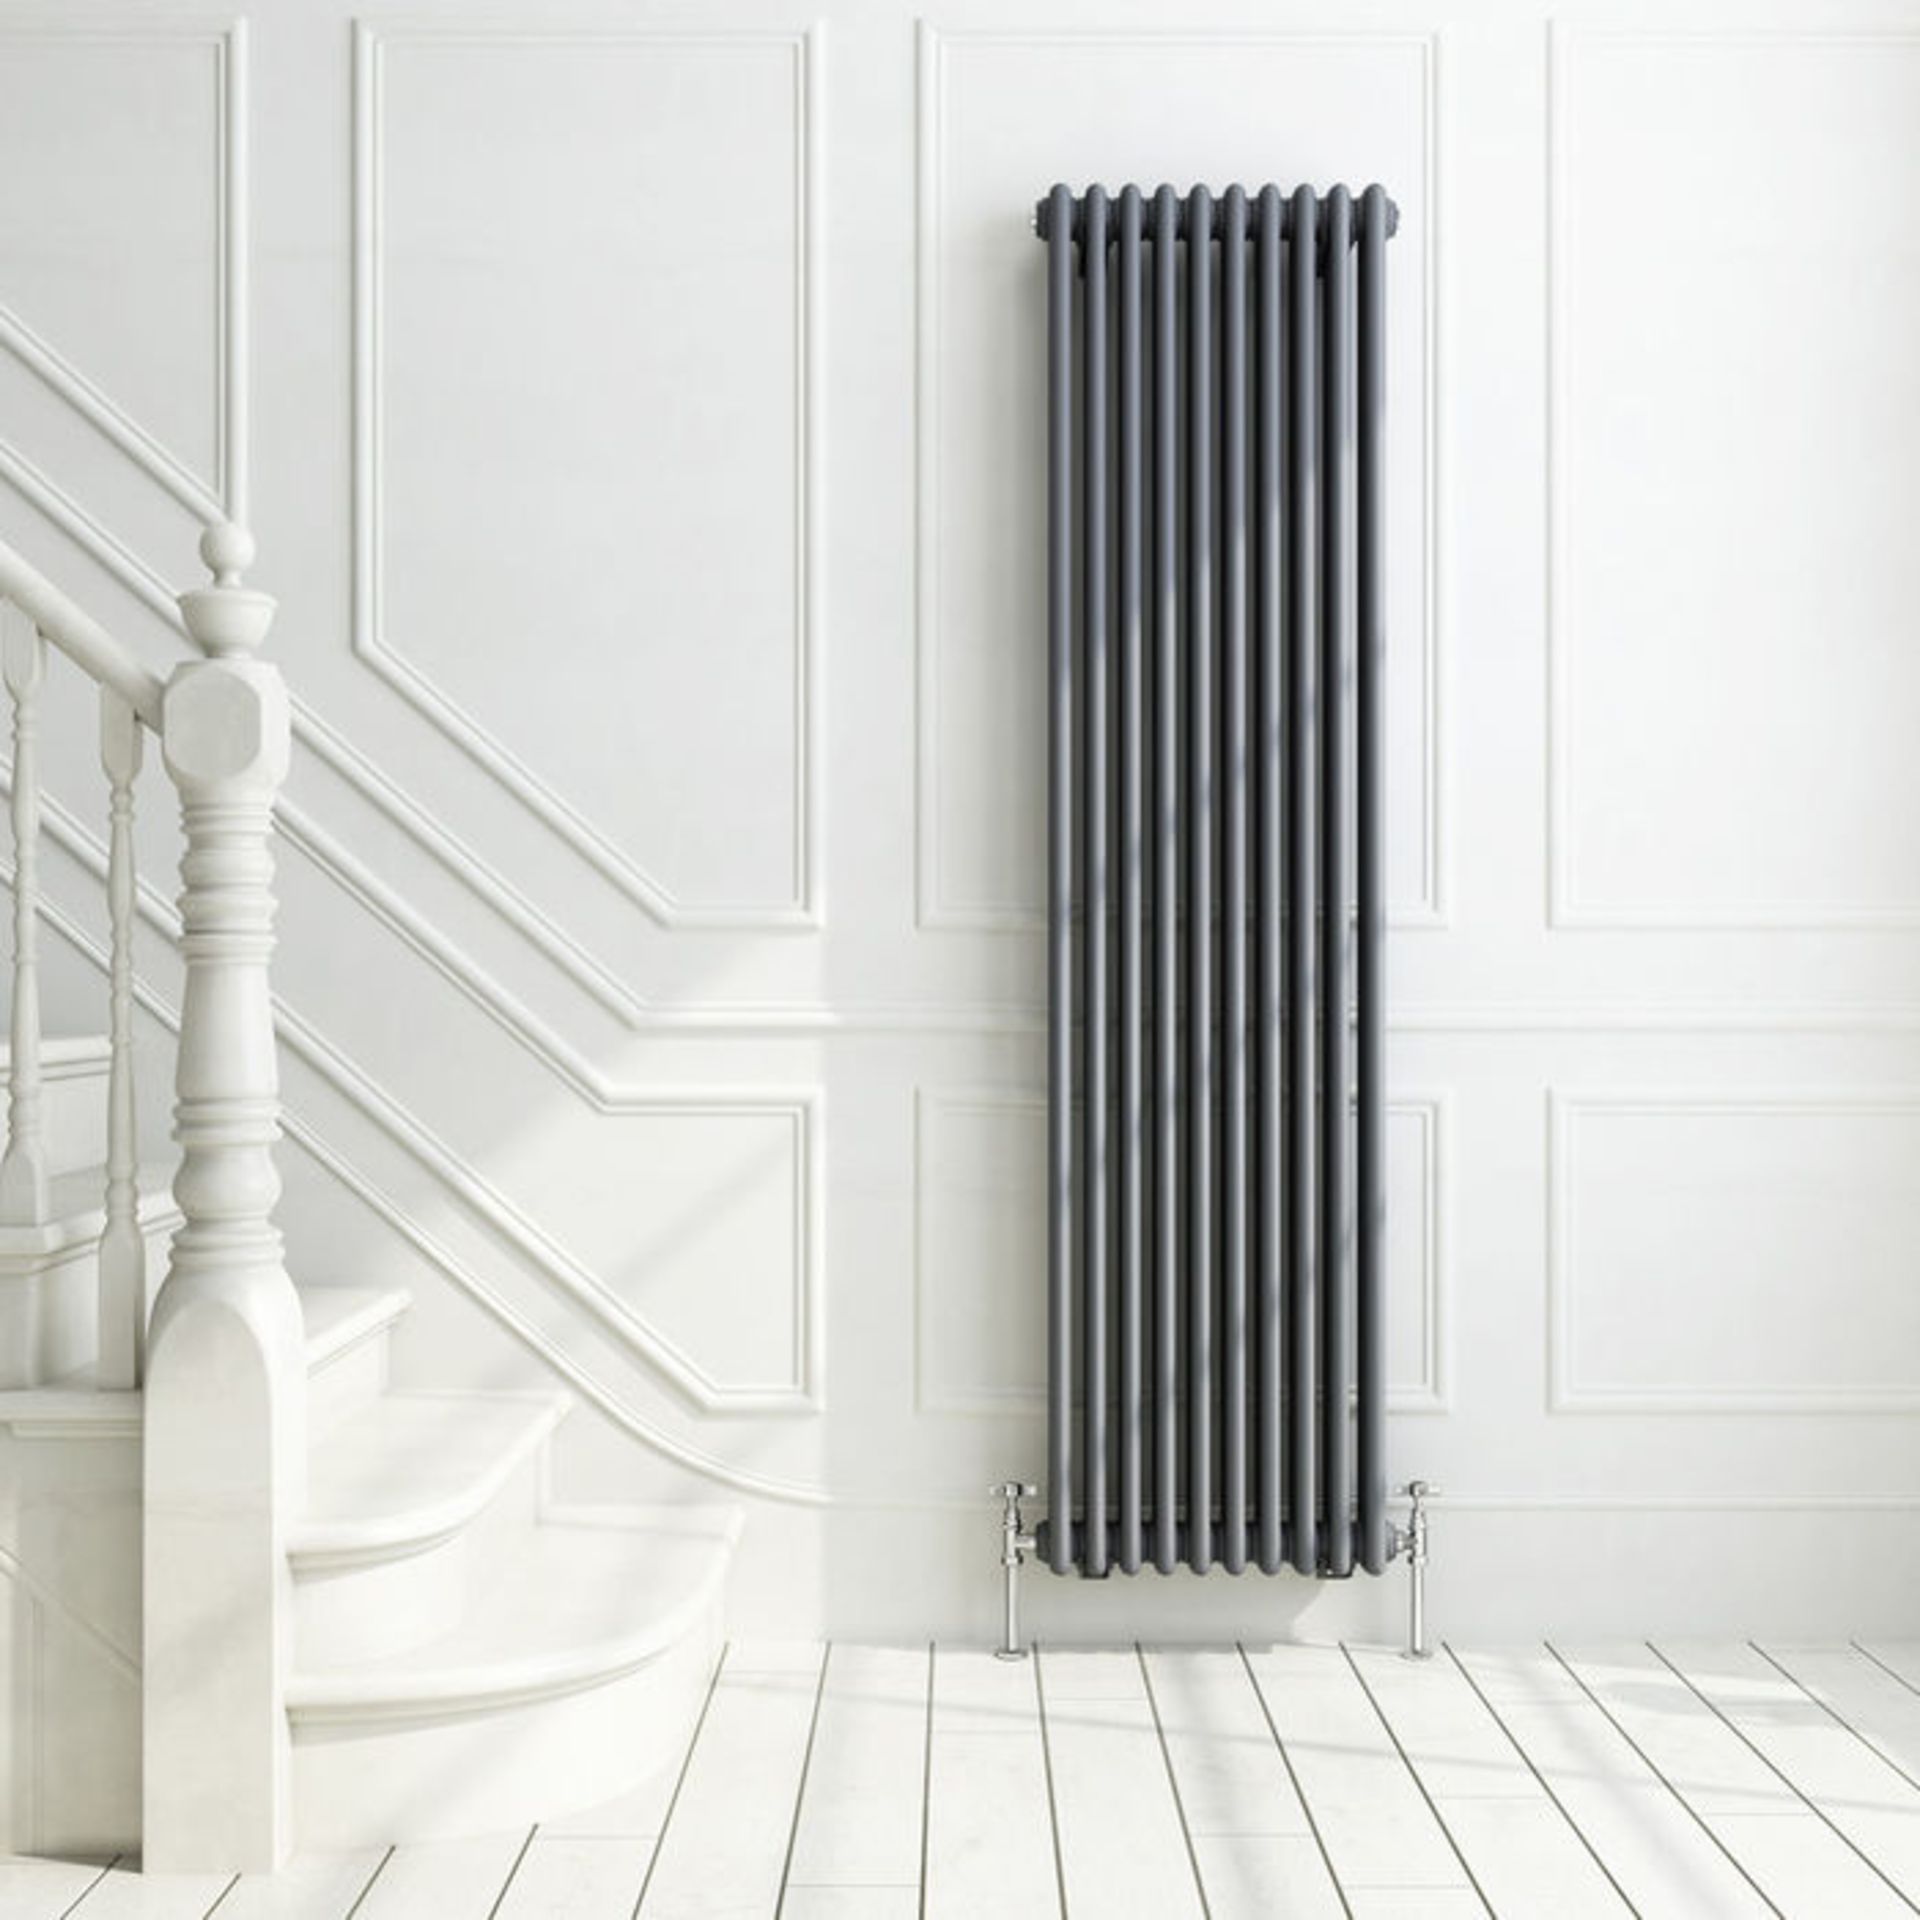 (W214) 1800x468mm Anthracite Triple Panel Vertical Colosseum Traditional Radiator. RRP £599.99. - Image 2 of 3